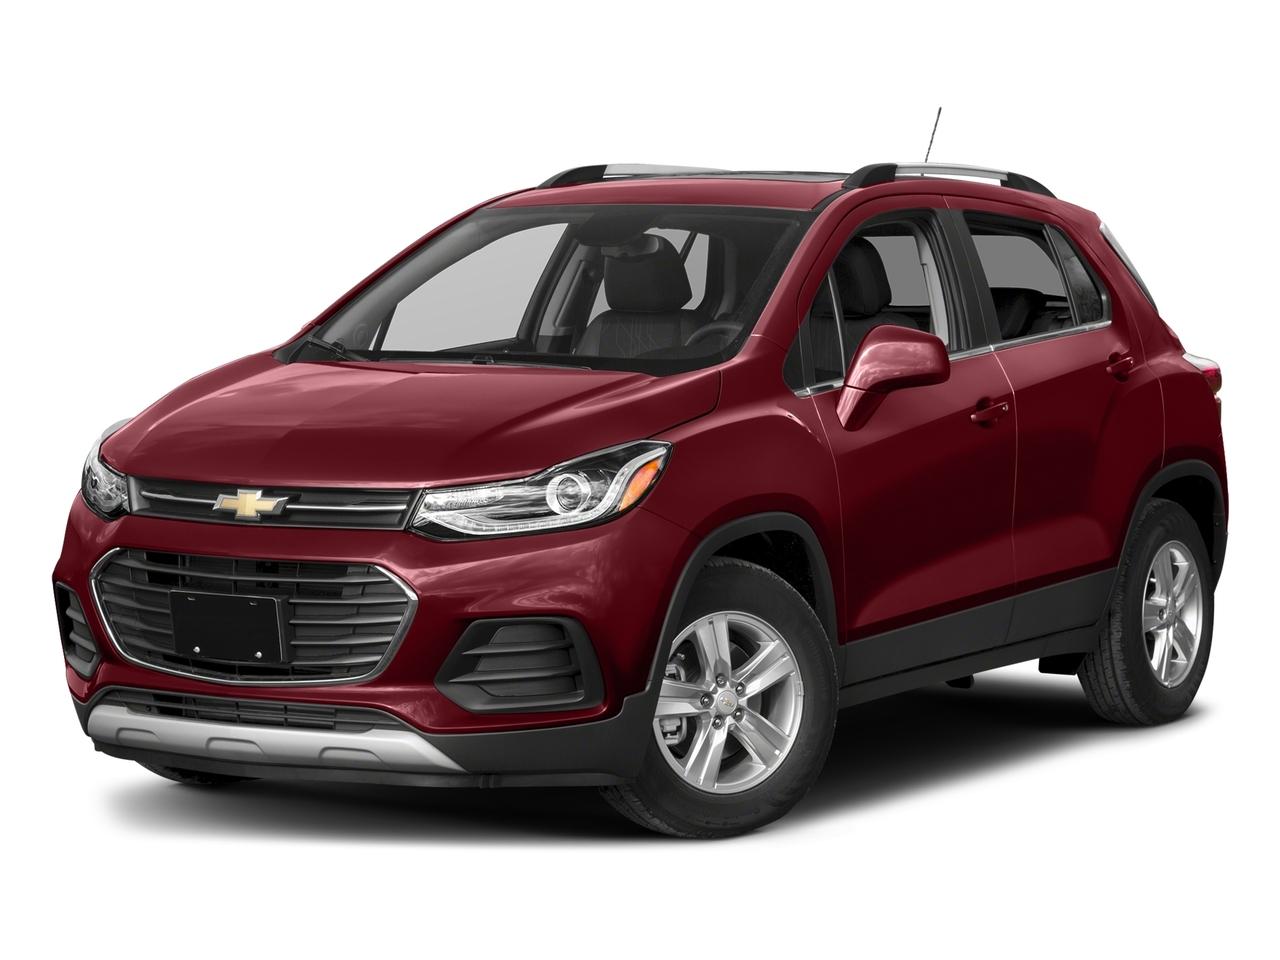 Used 2017 Chevrolet Trax FWD 4dr LT in Crimson Metallic for sale in